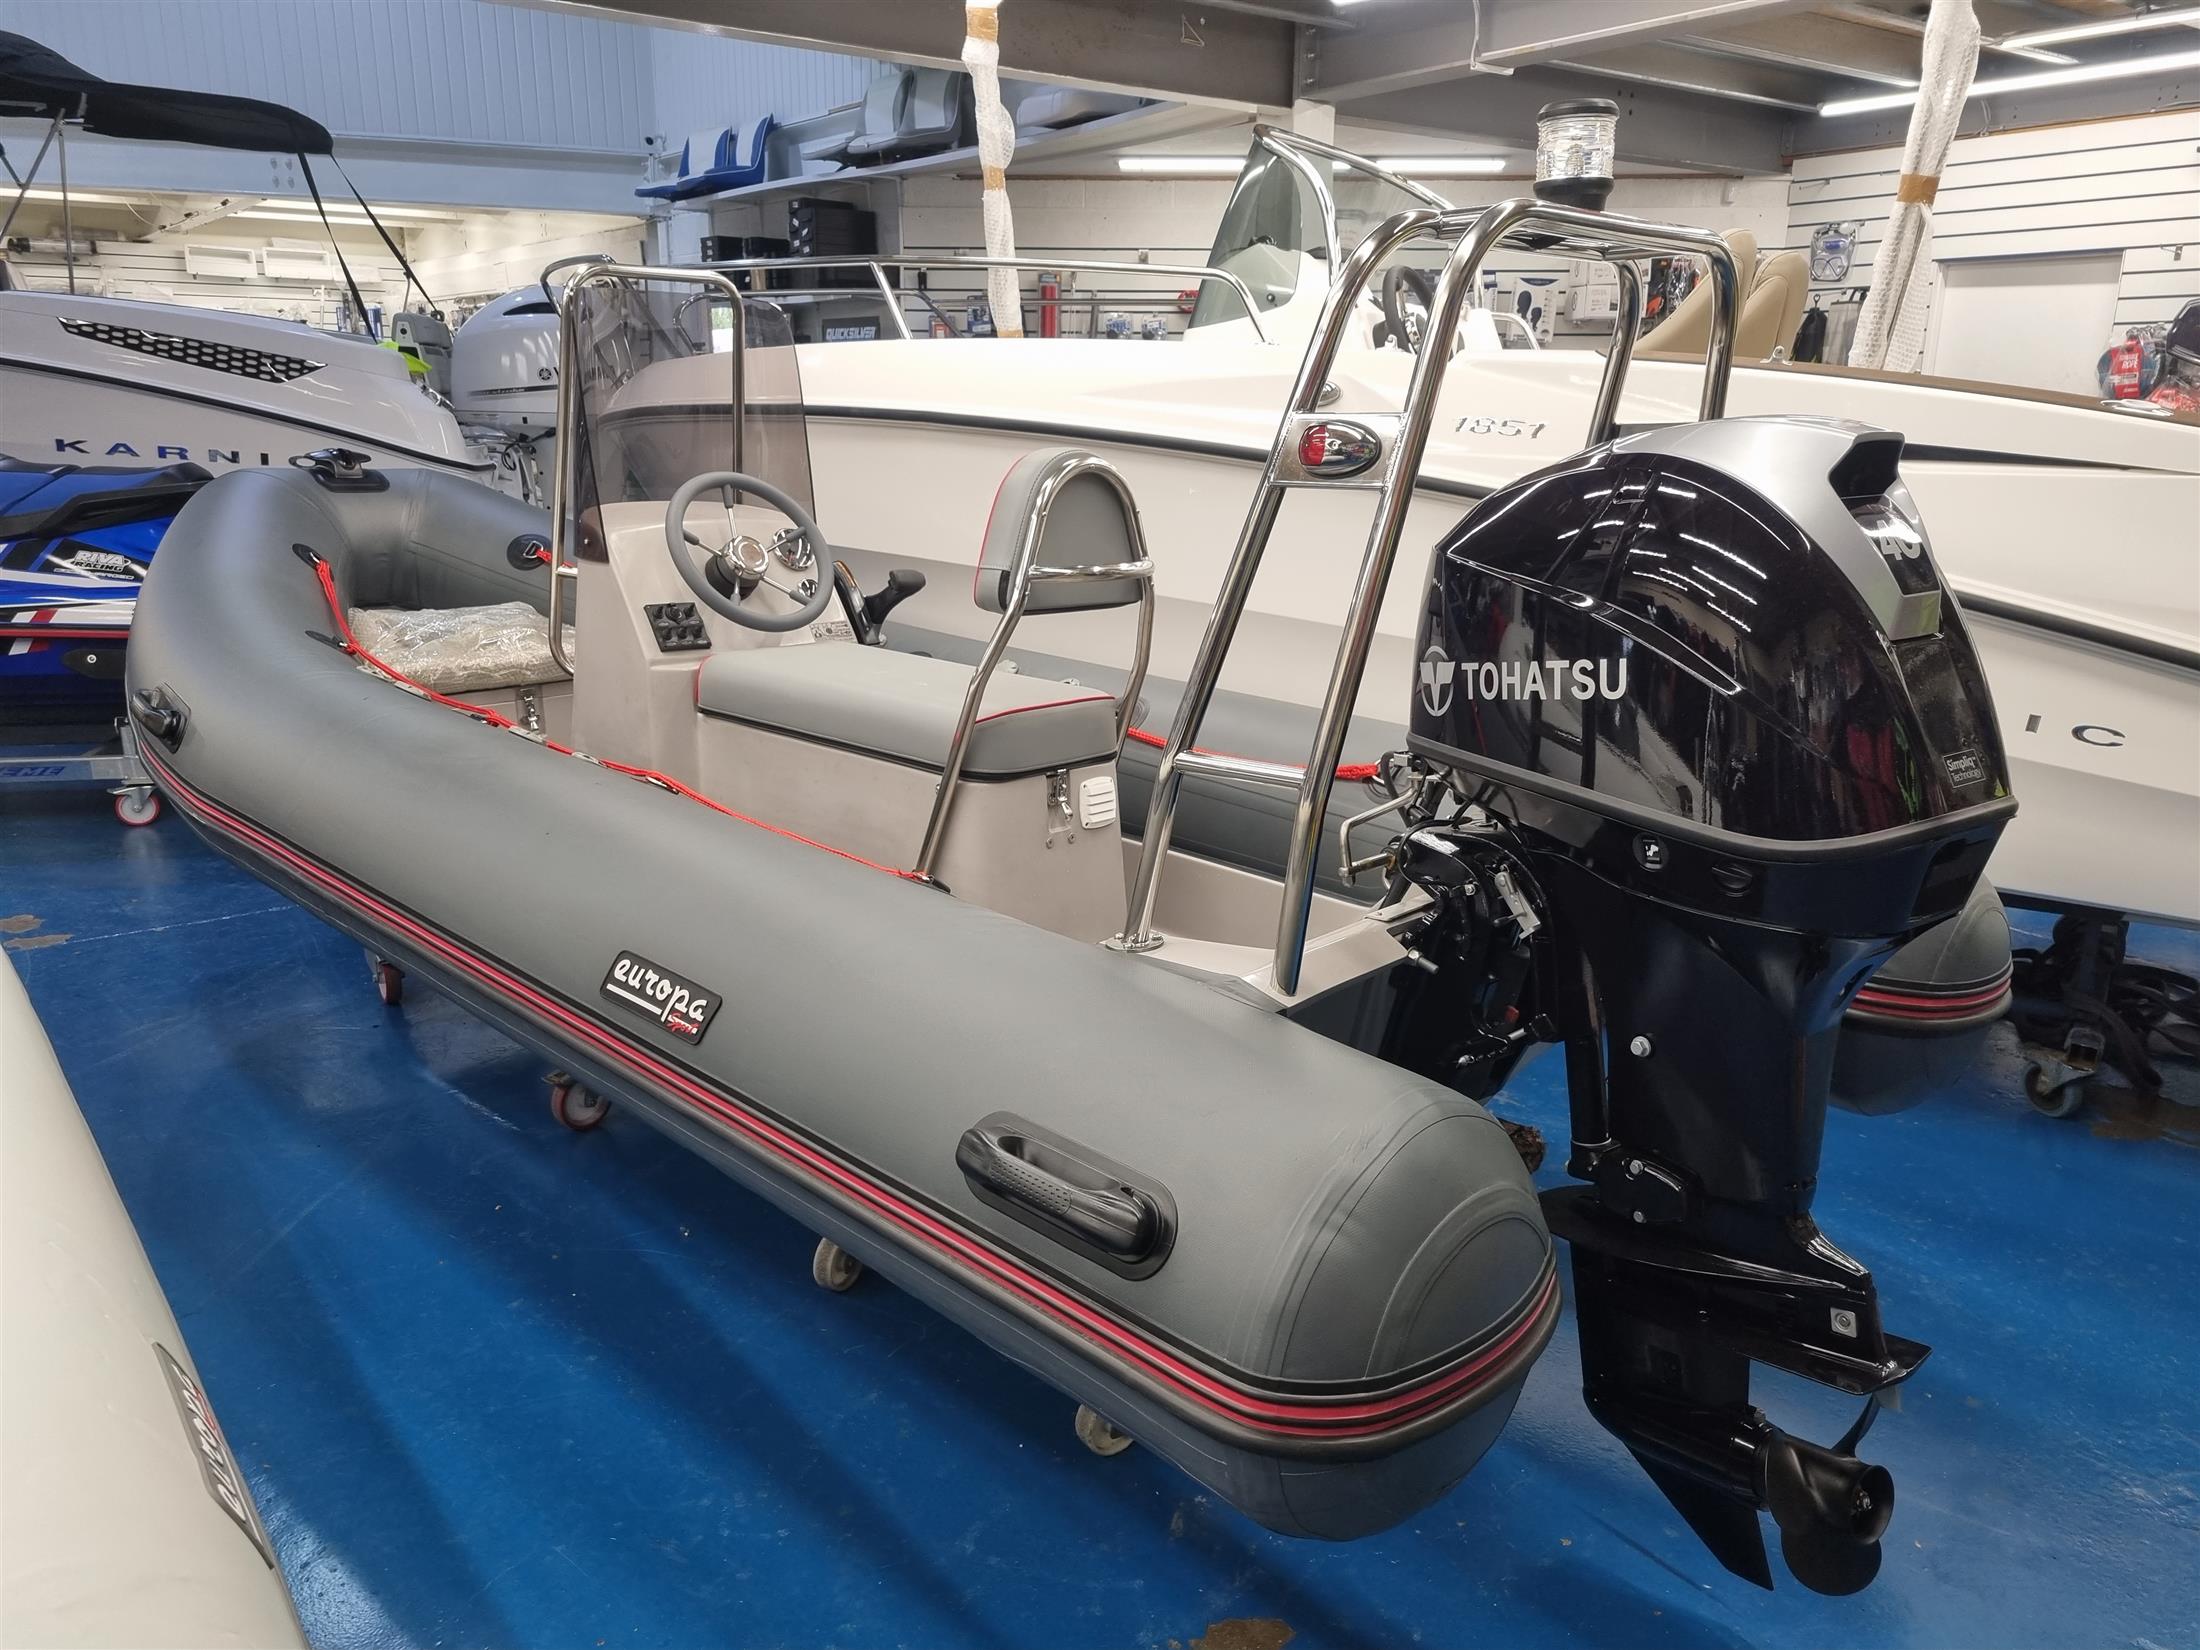 New Europa Sport R420 4.2m RIB Platinum series with Tohatsu 40hp Four Stroke Outboard